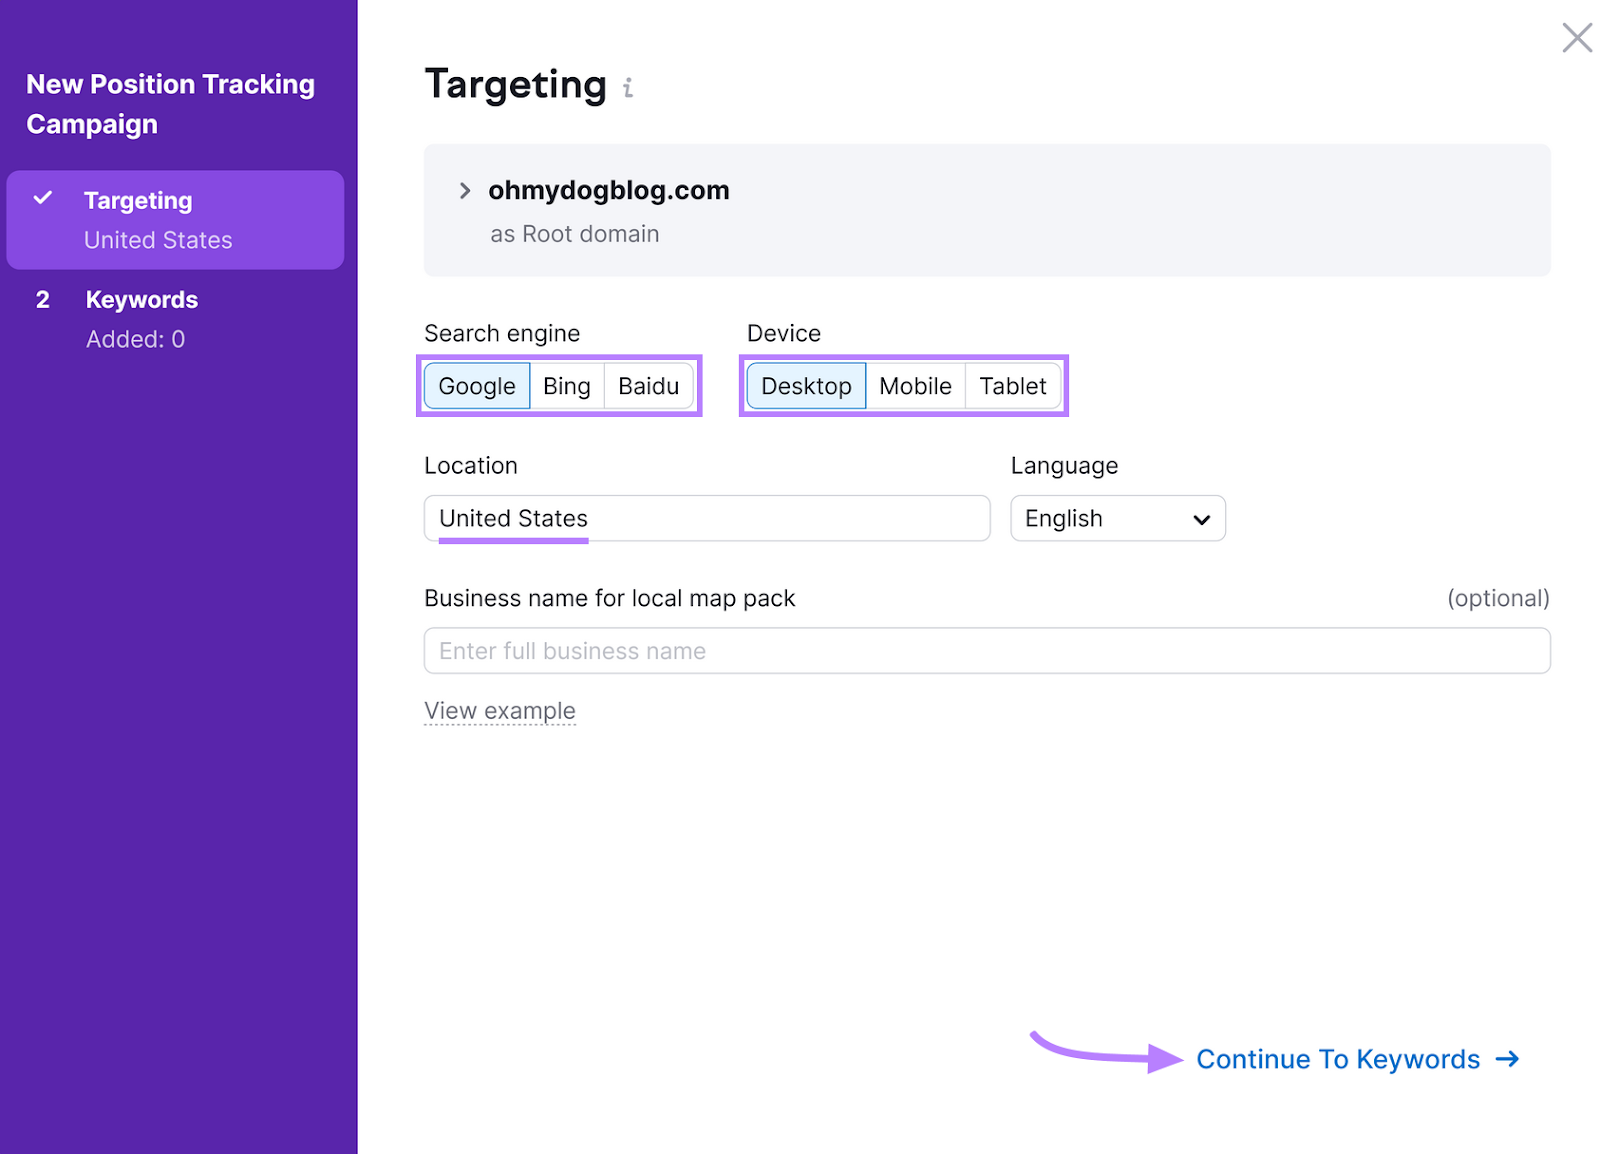 targeting configuration settings in Position Tracking tool